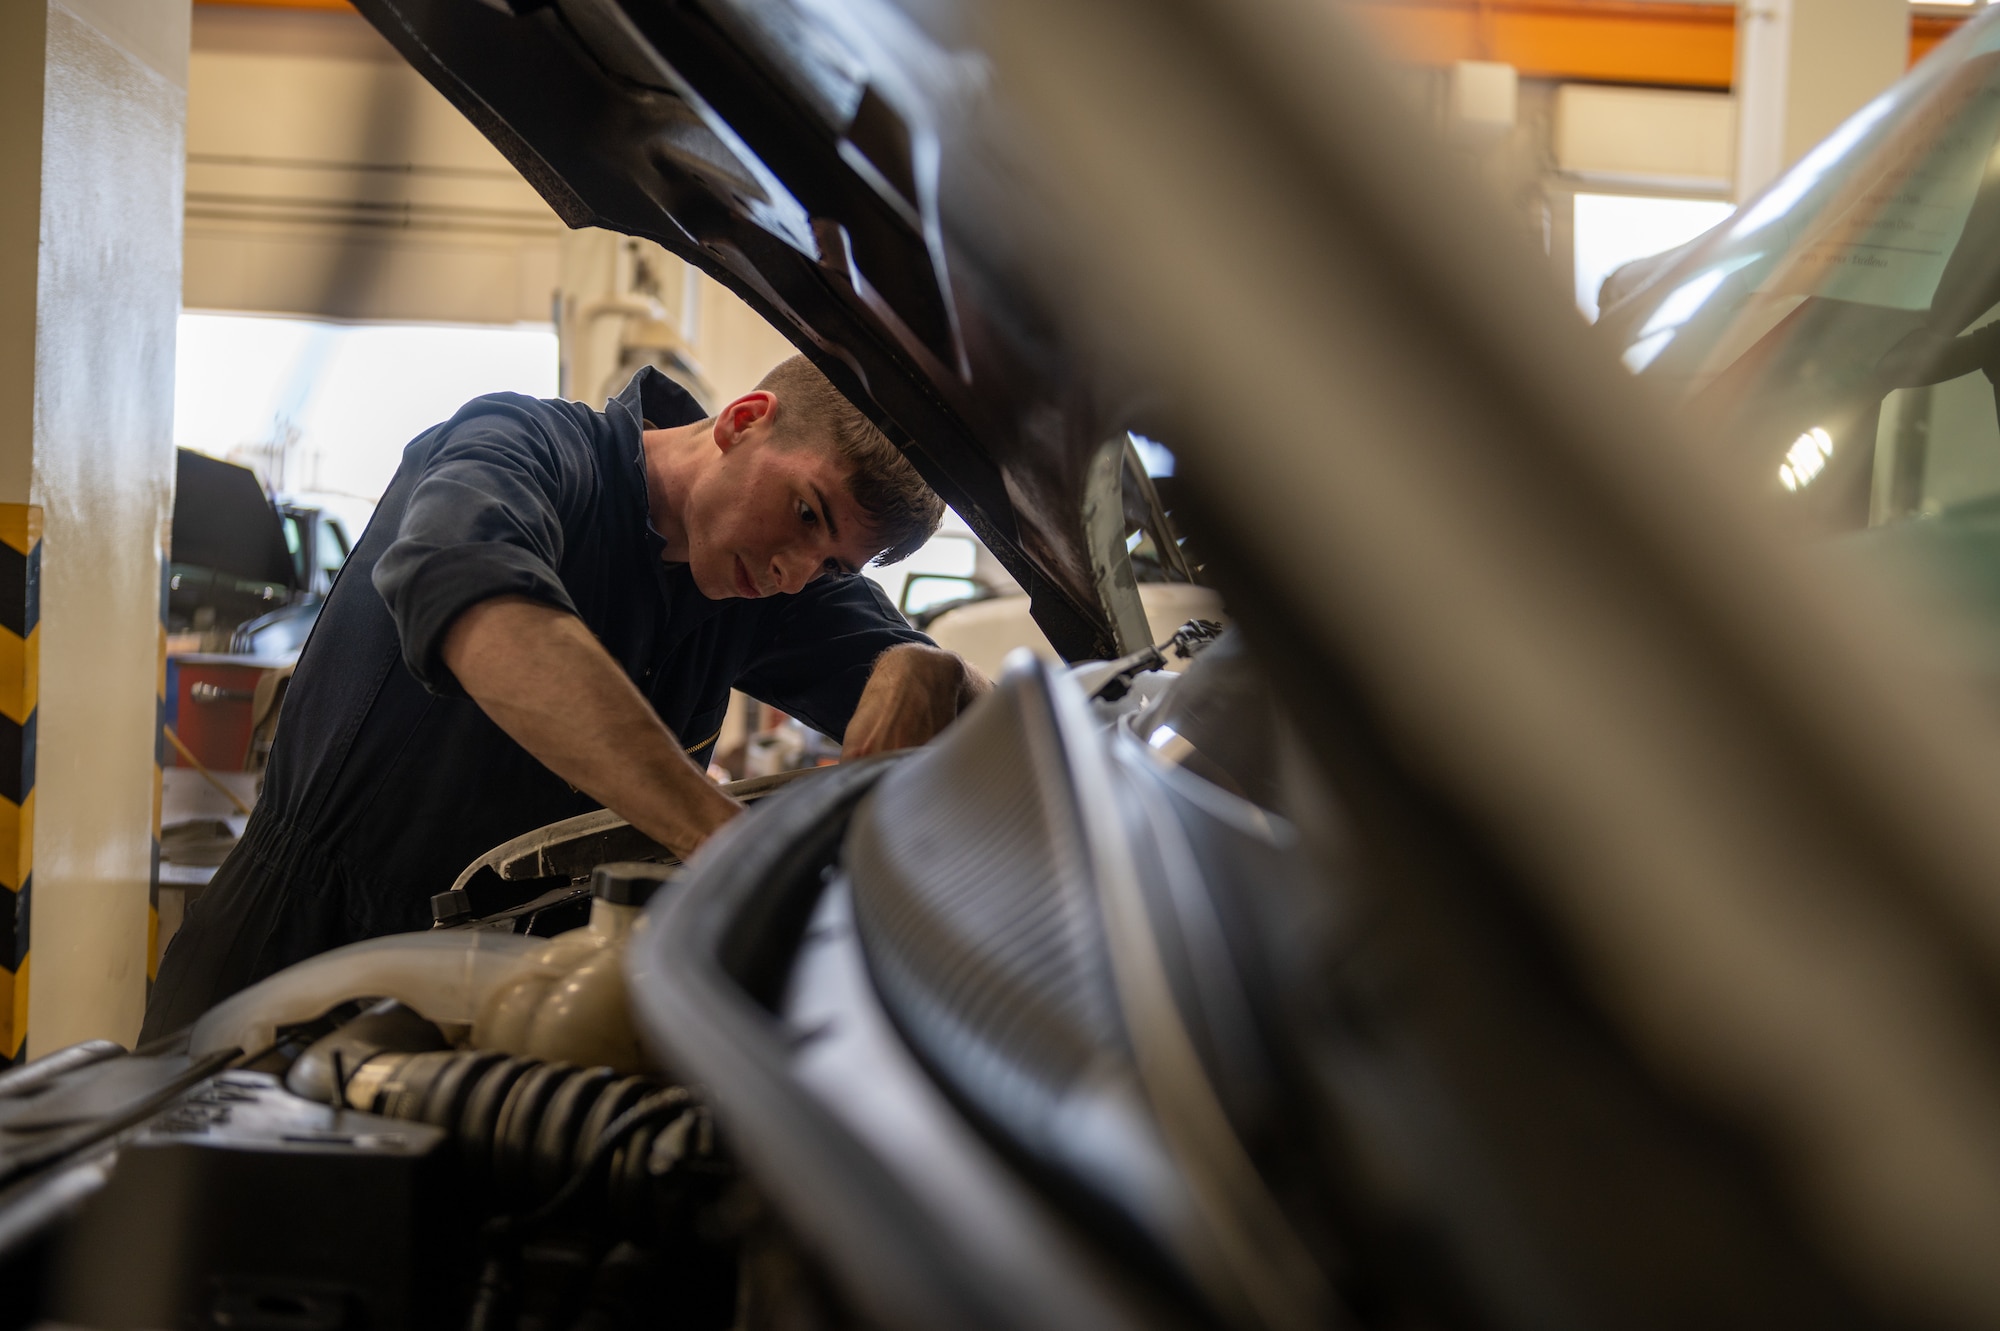 Airman performs maintenance on a vehicle